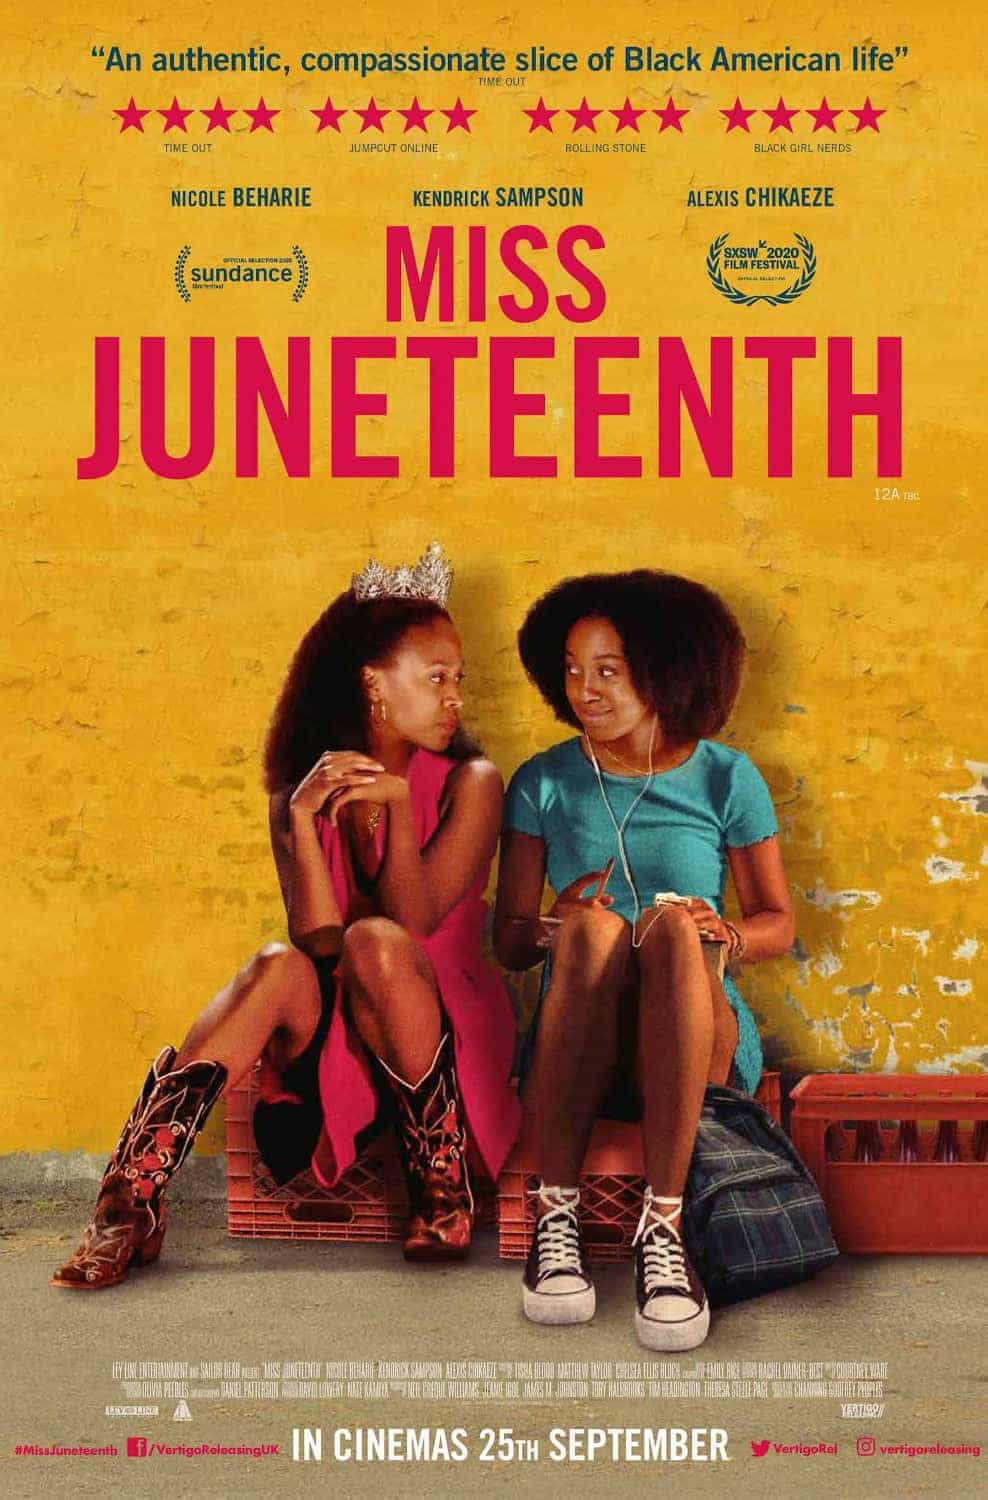 Miss Juneteenth is given a 15 age rating in the UK for strong language